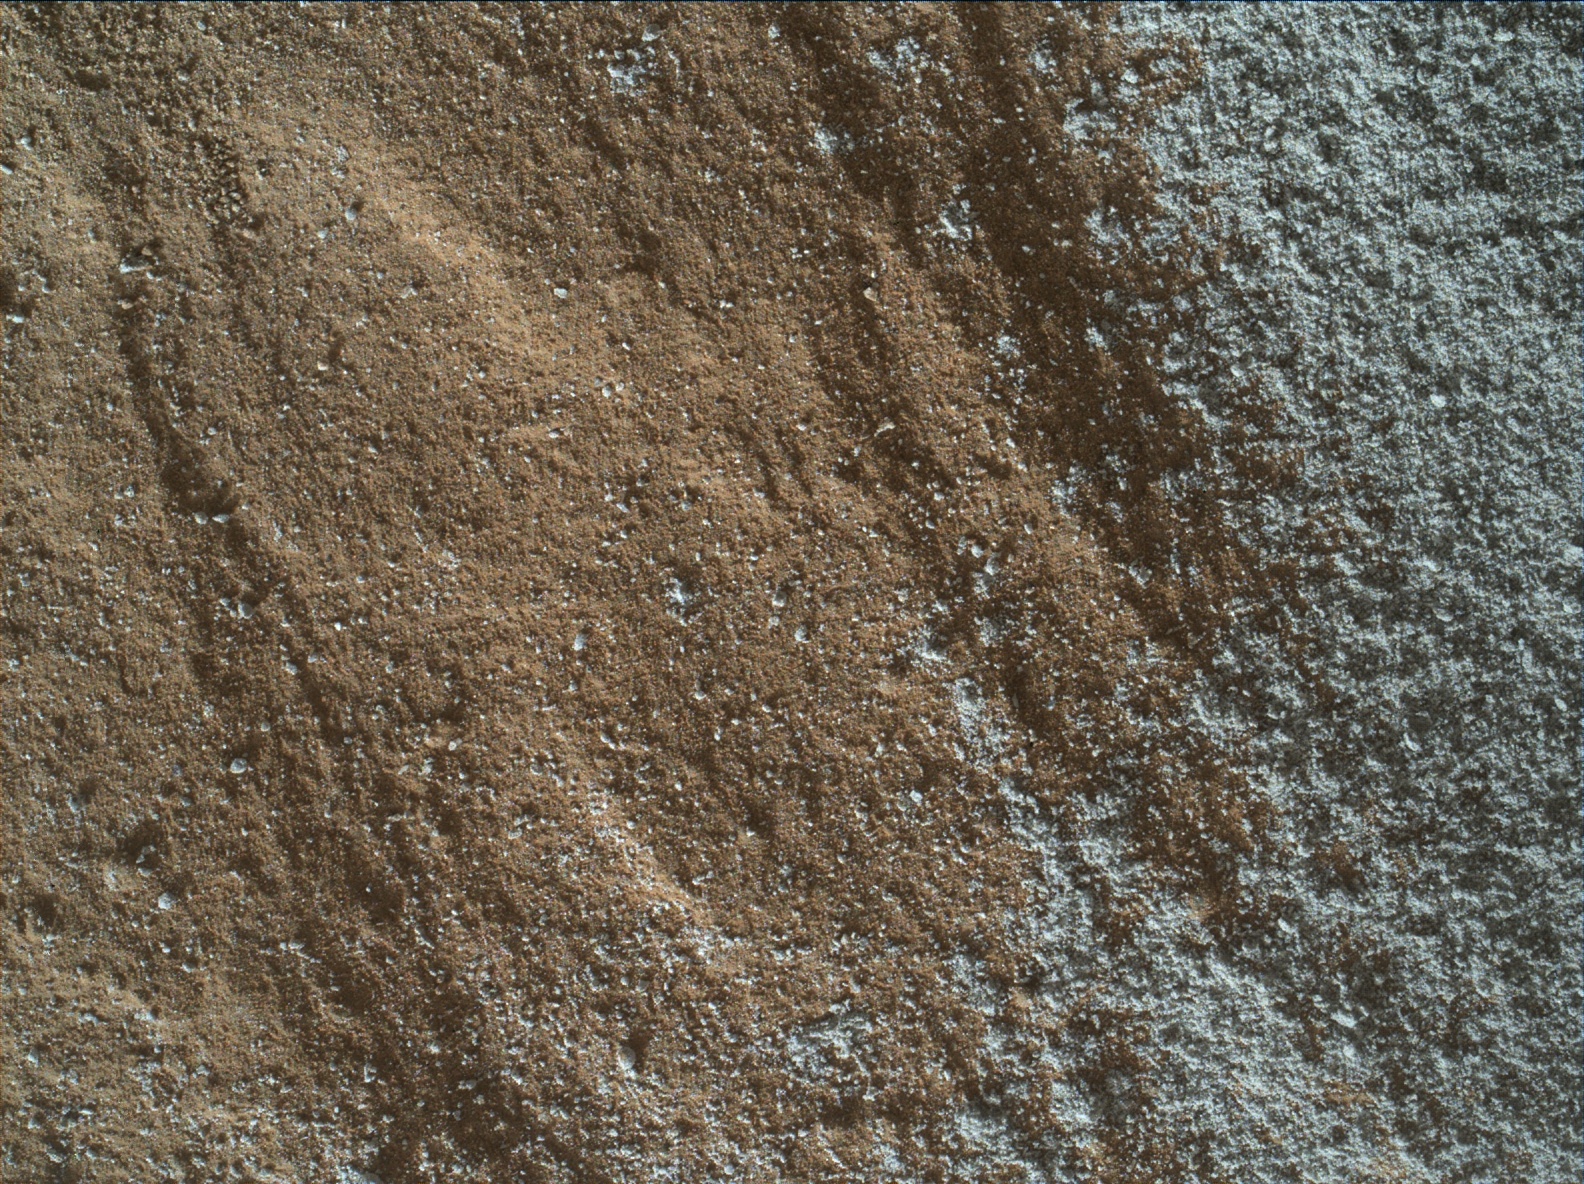 Nasa's Mars rover Curiosity acquired this image using its Mars Hand Lens Imager (MAHLI) on Sol 1328